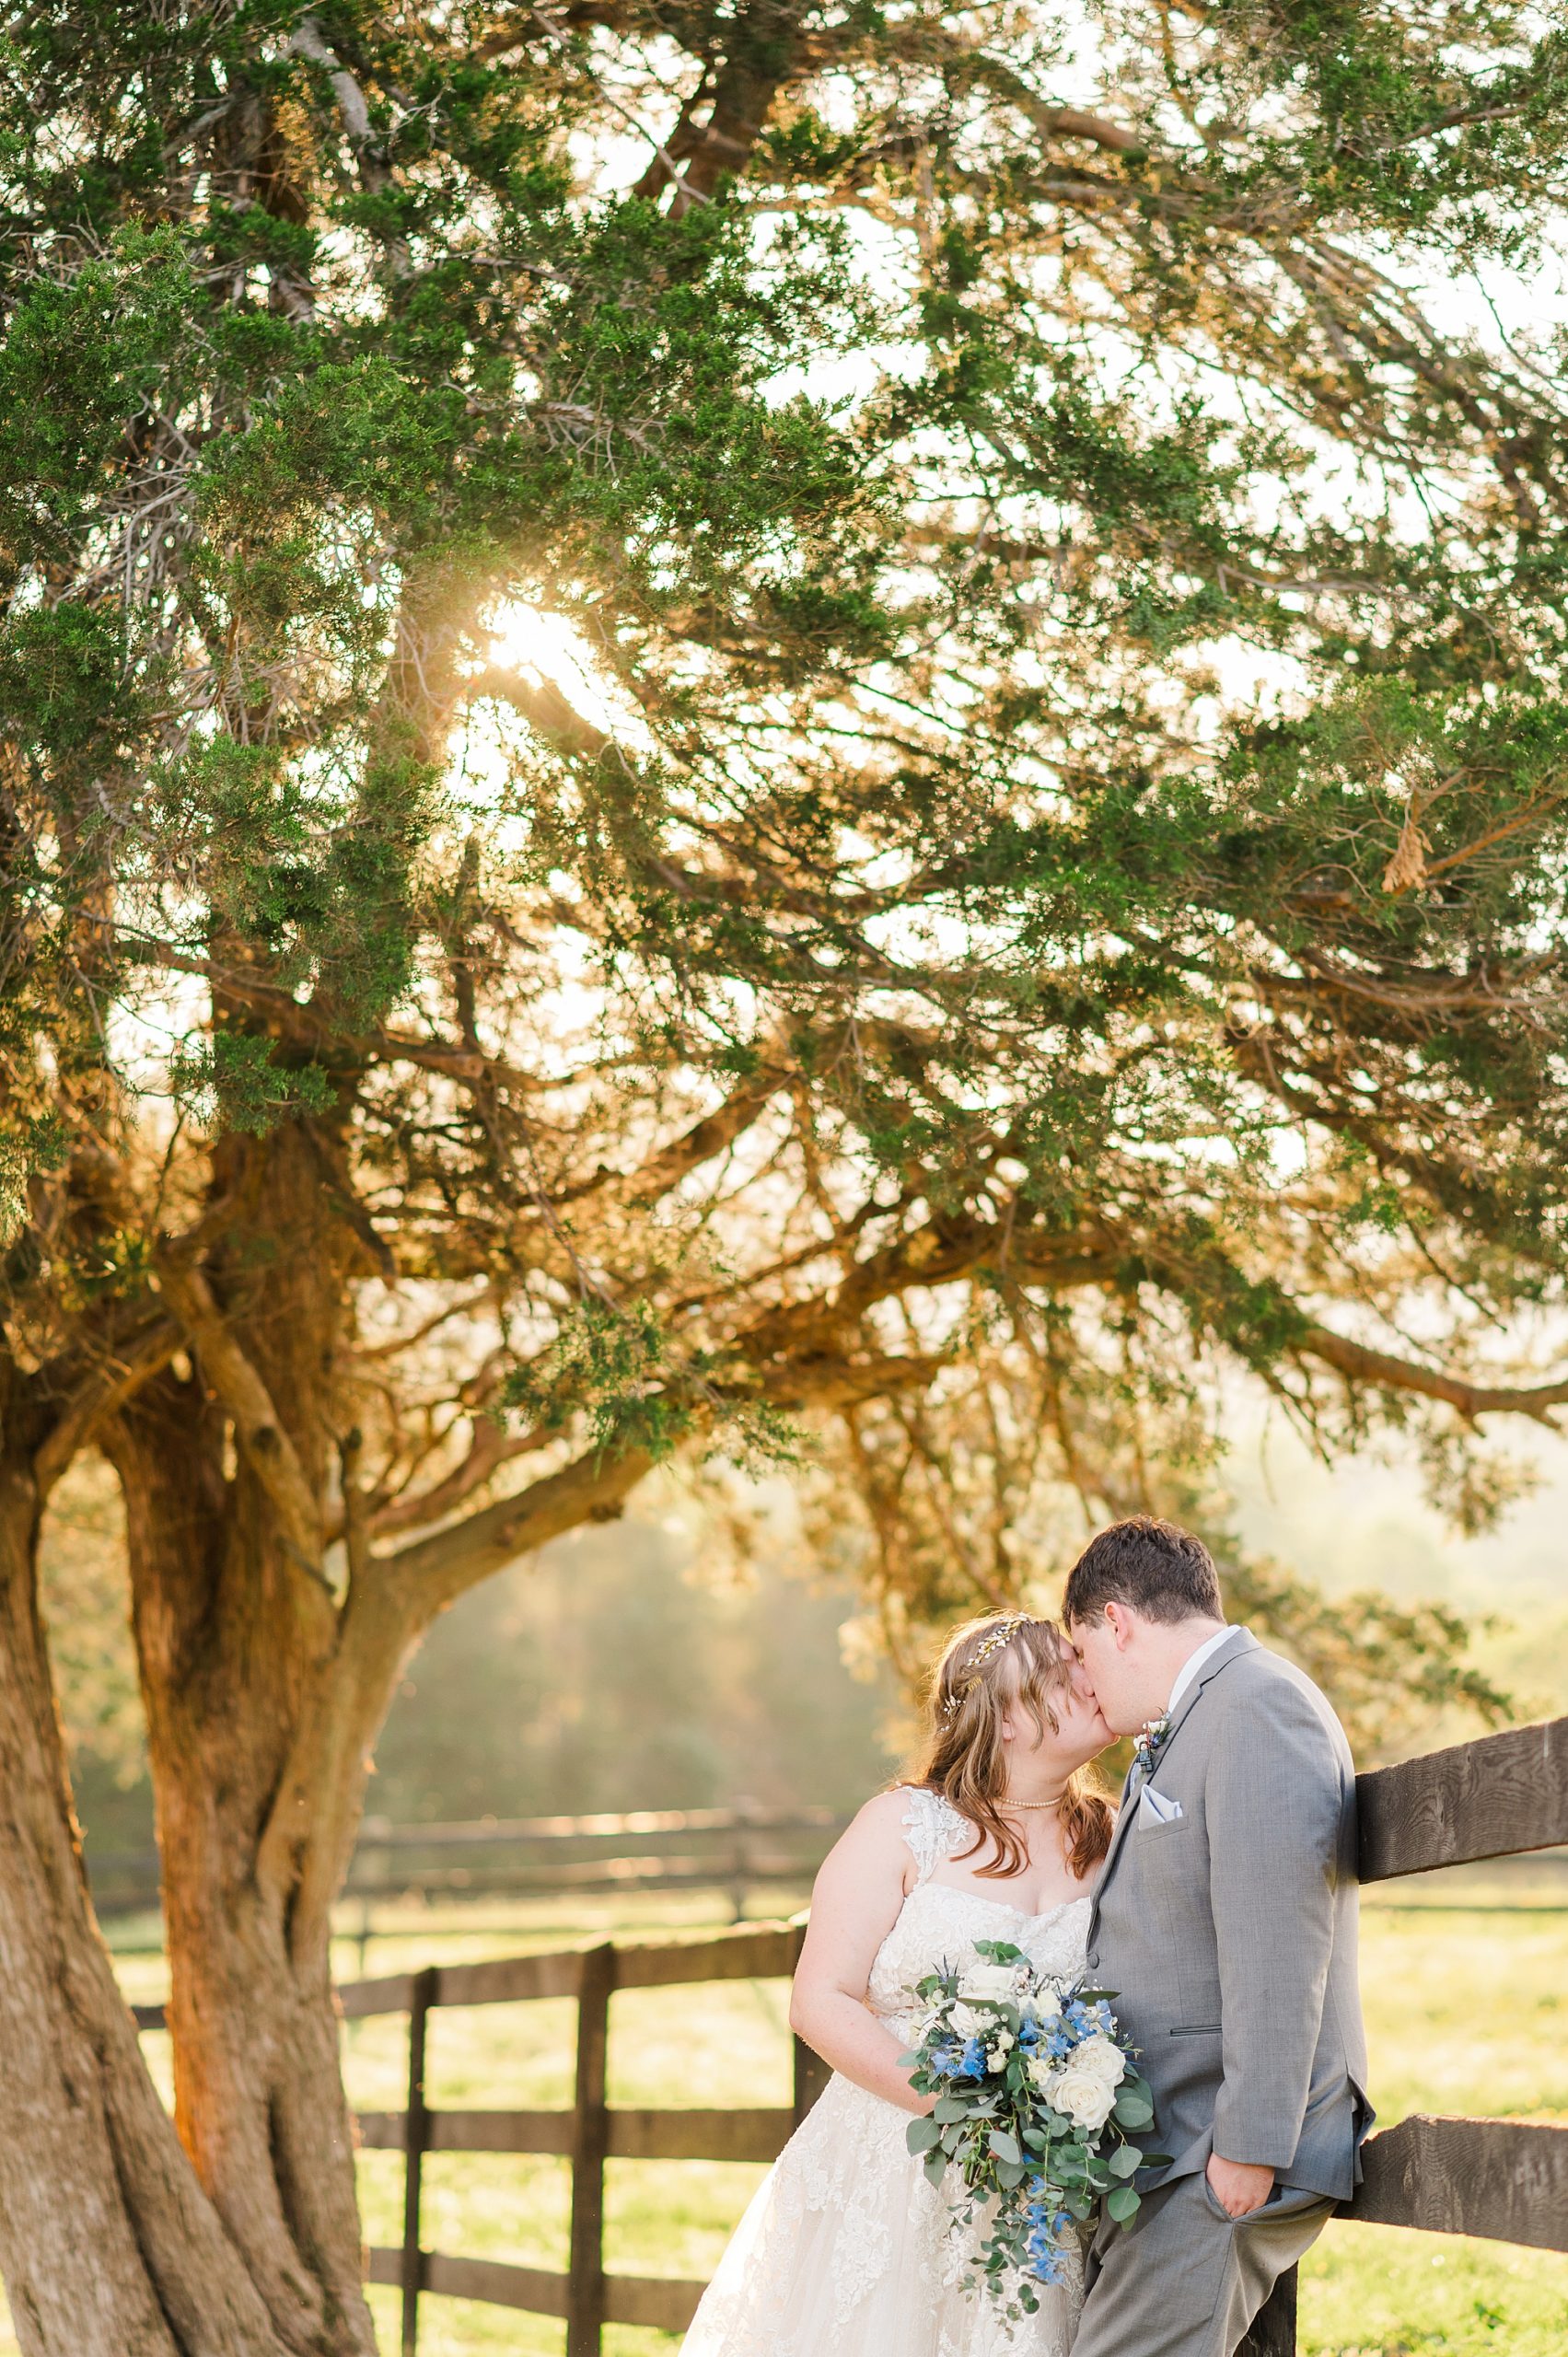 Bride and Groom Portraits at Wedding at Wolftrap Farm. Wedding Photography by Kailey Brianne Photography